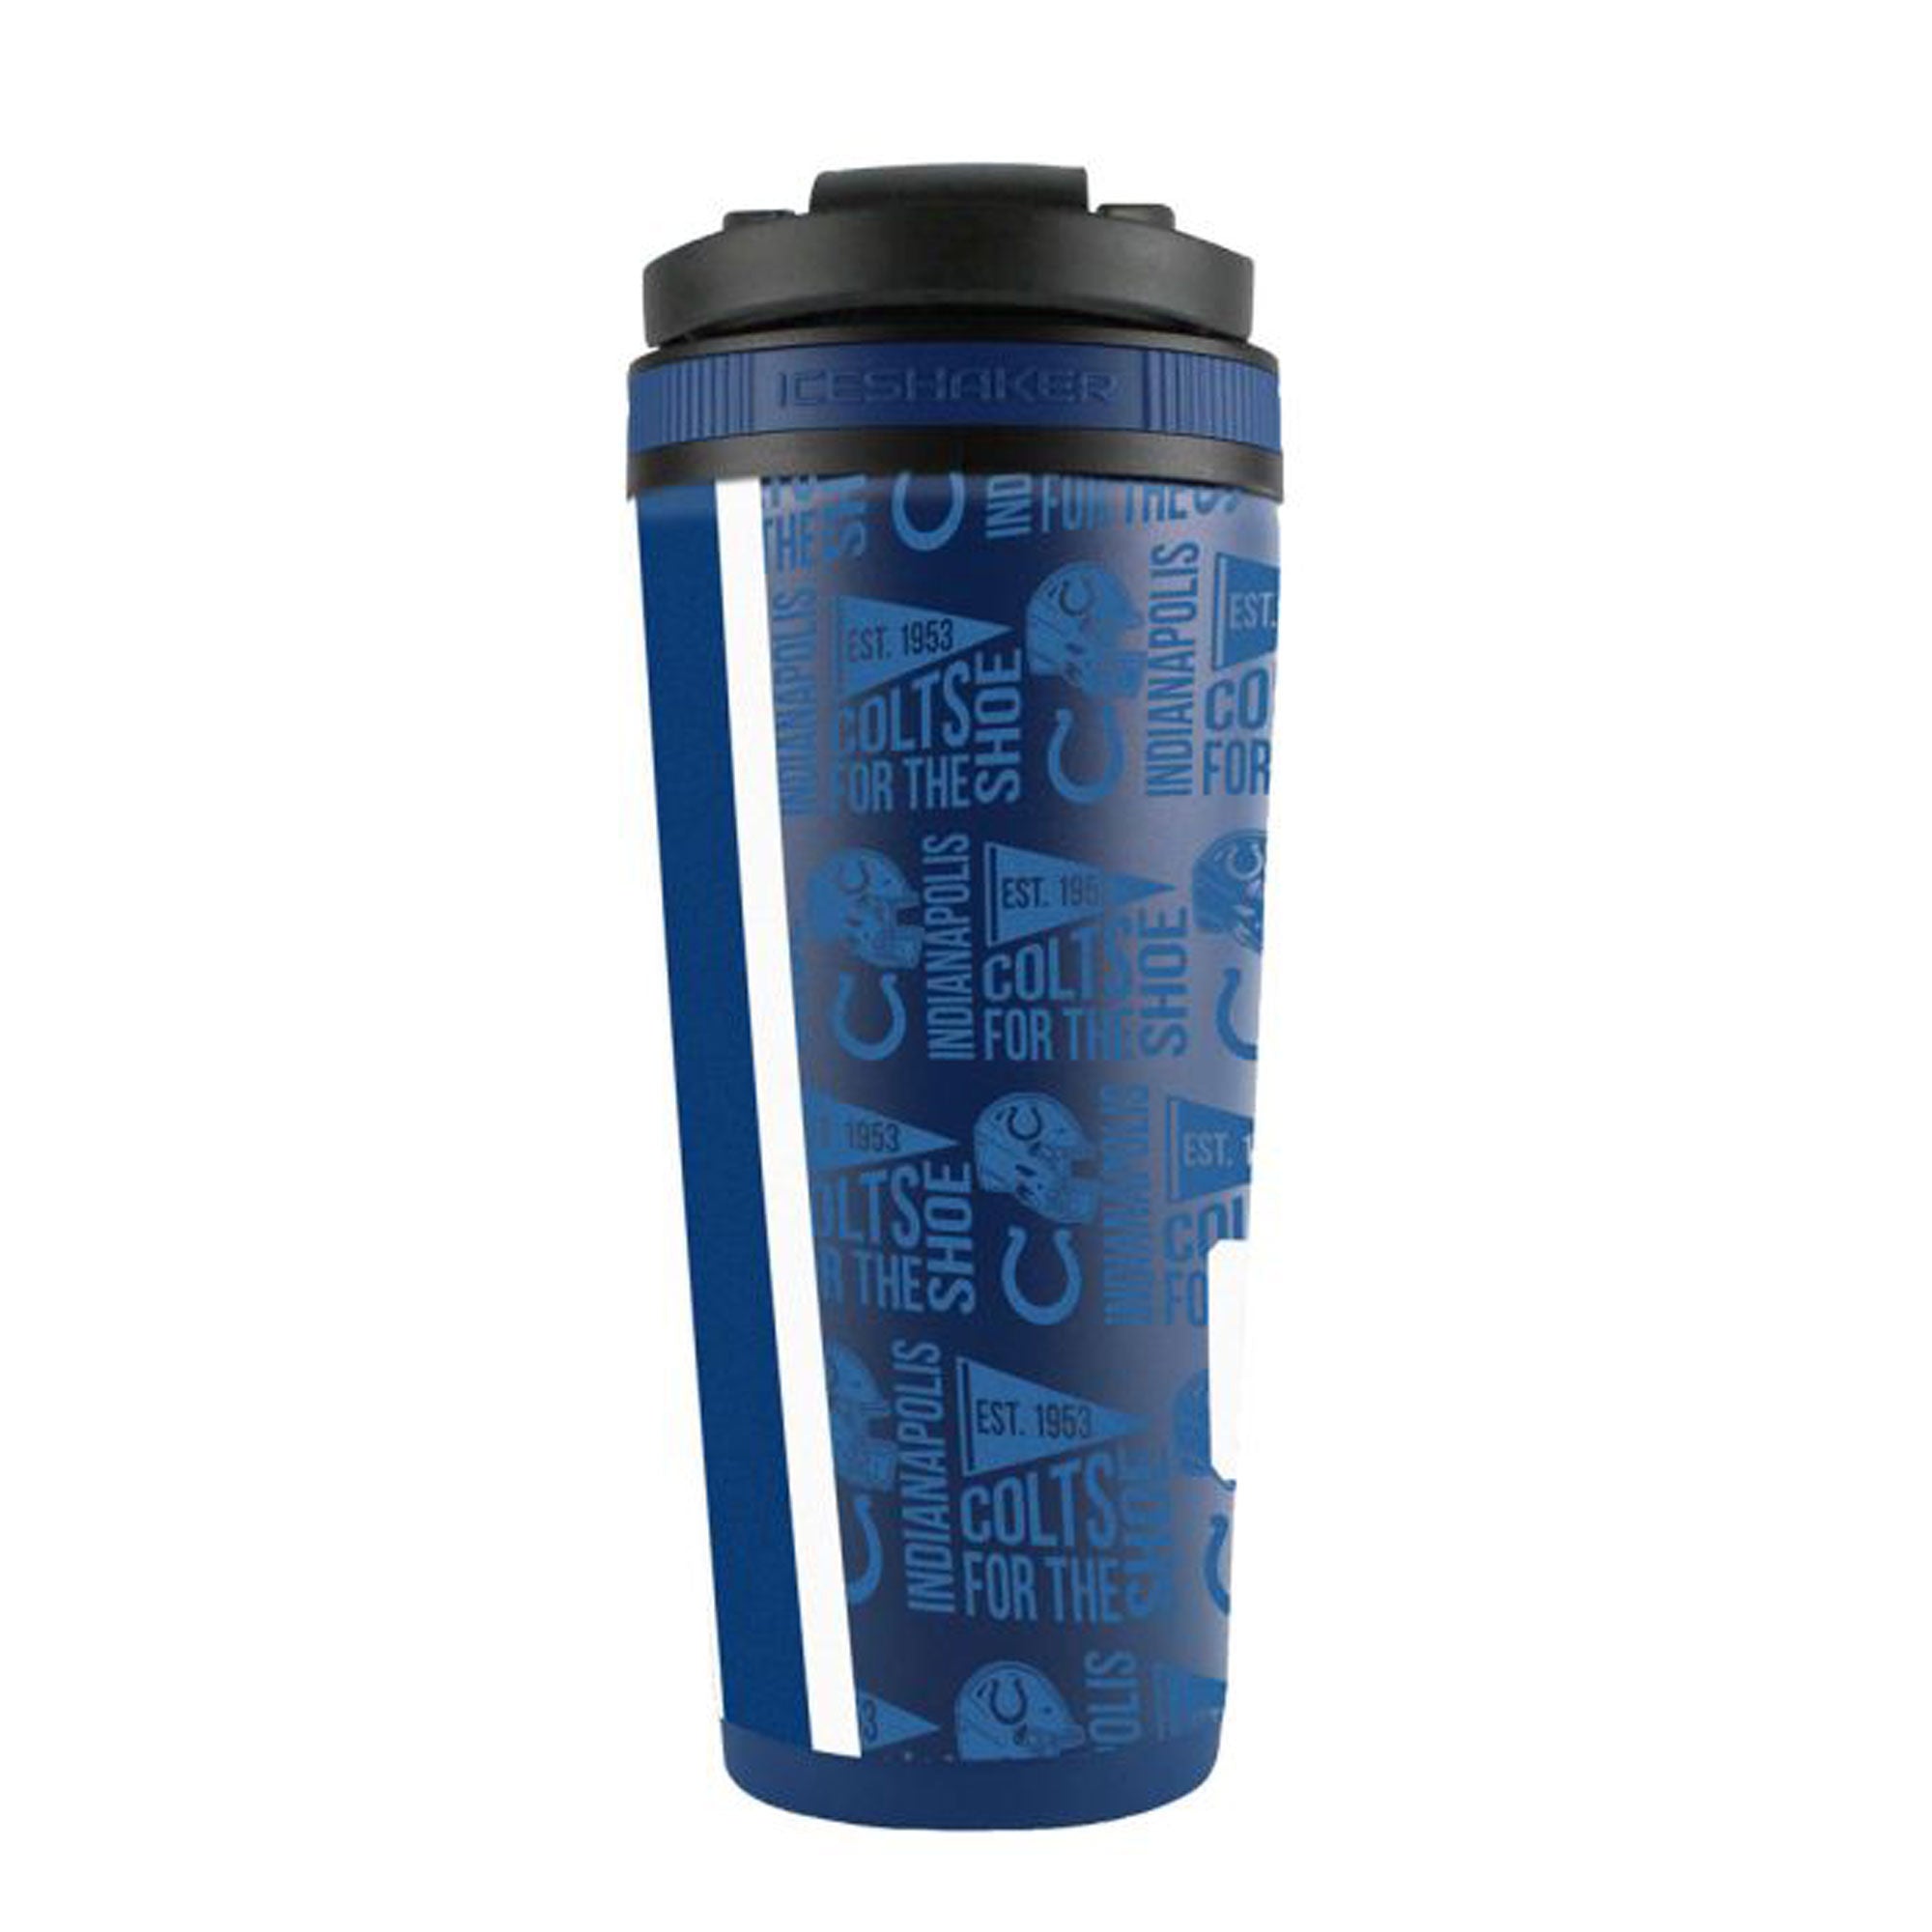 Officially Licensed Indianapolis Colts 4D Ice Shaker